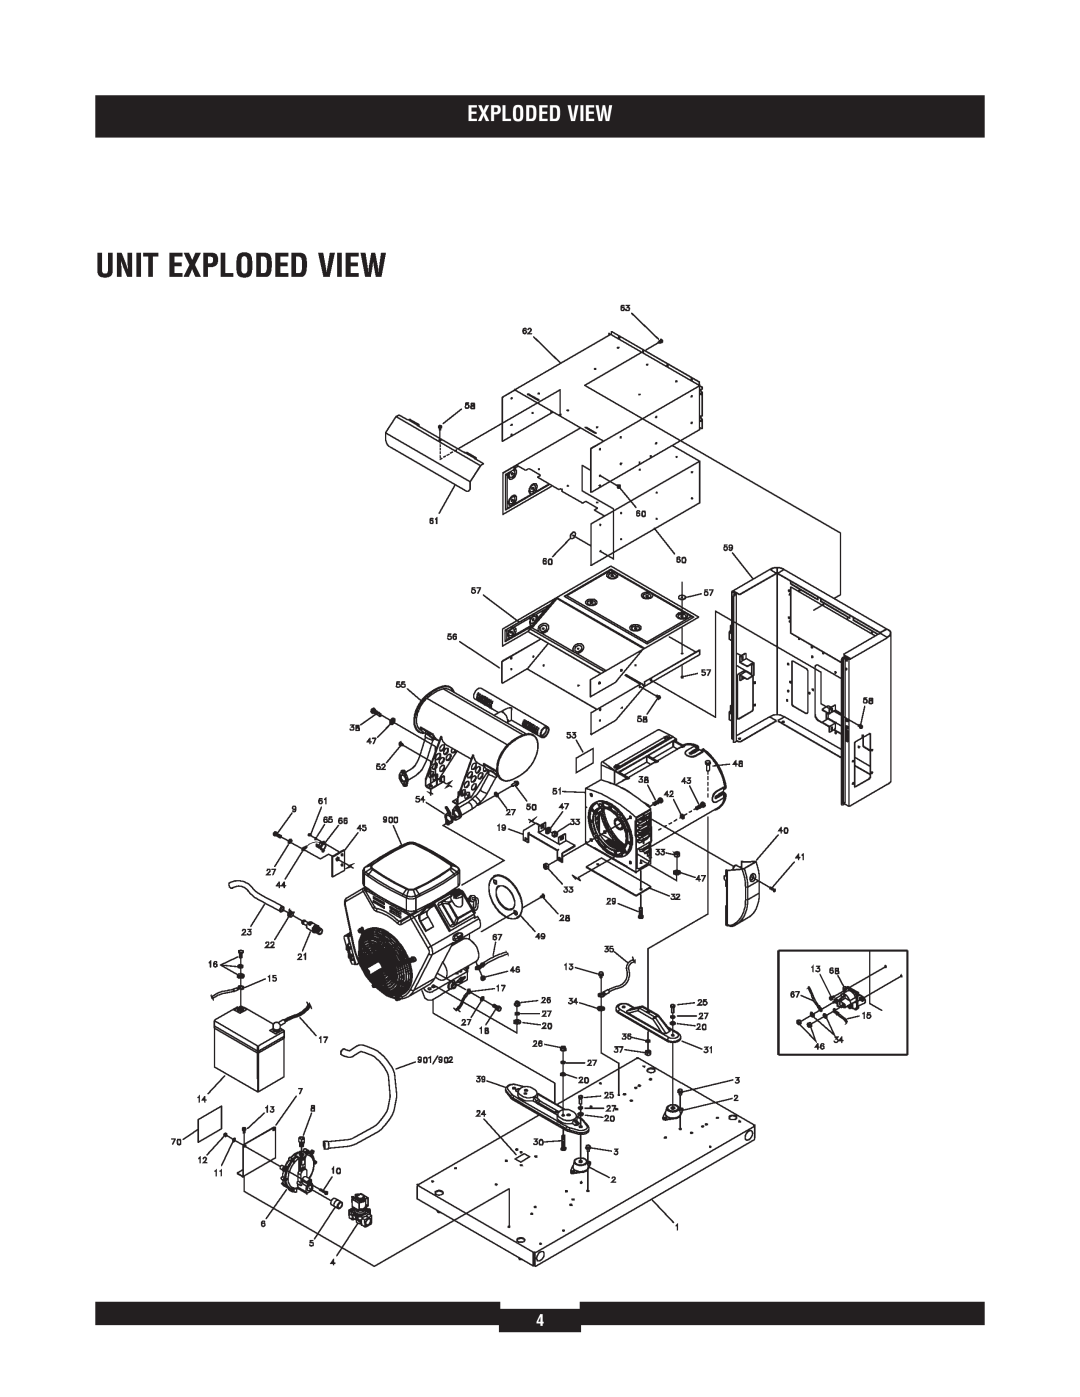 Briggs & Stratton 040212-1 manual Unit Exploded View 